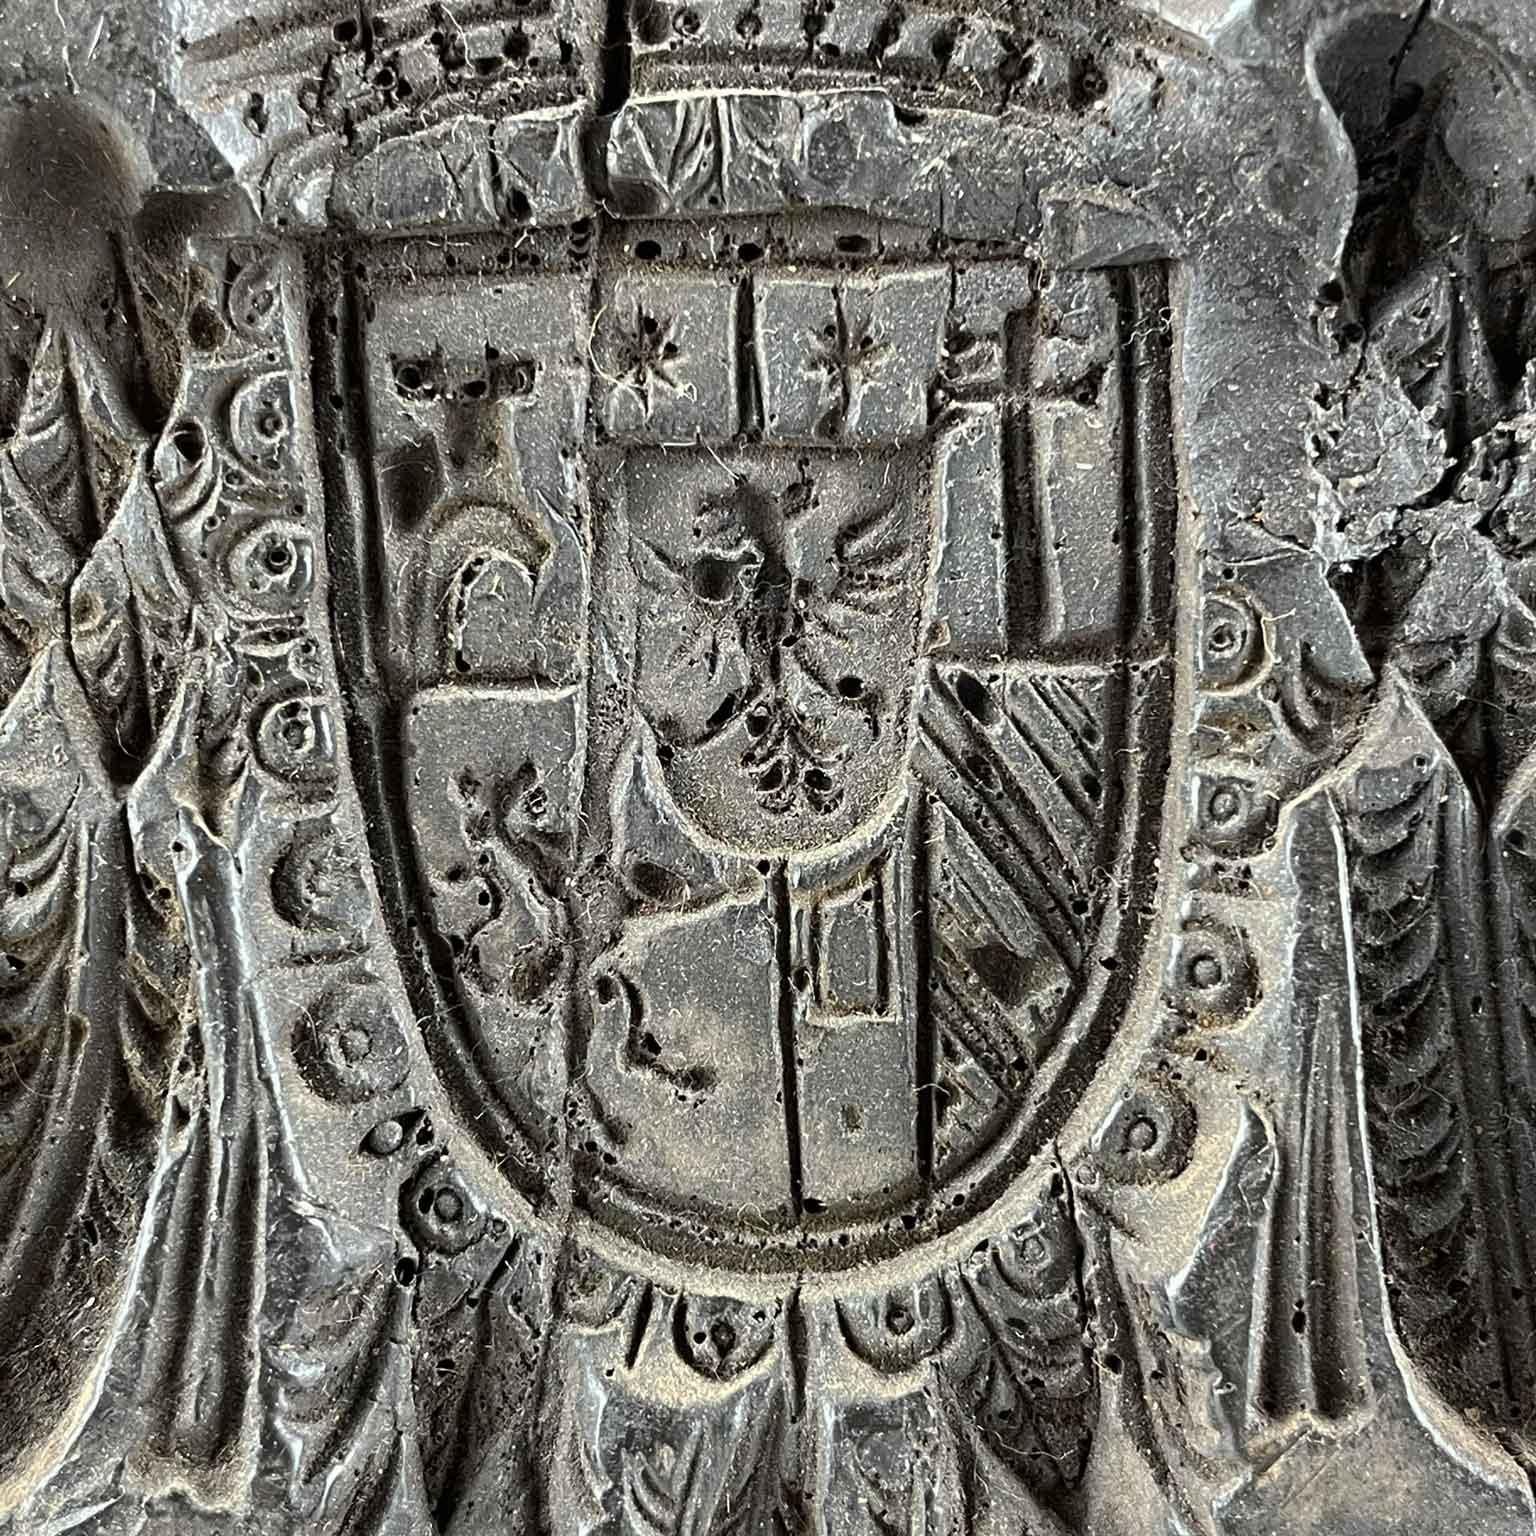 18th century dark wax butter mold with habsburg imperial coat of arms, diameter 20 cm with engraved inscription IG S and M S 1737. 

Good age related condition, this lovely Mittle-European work of art shows old repairs on the bottom, see detailed